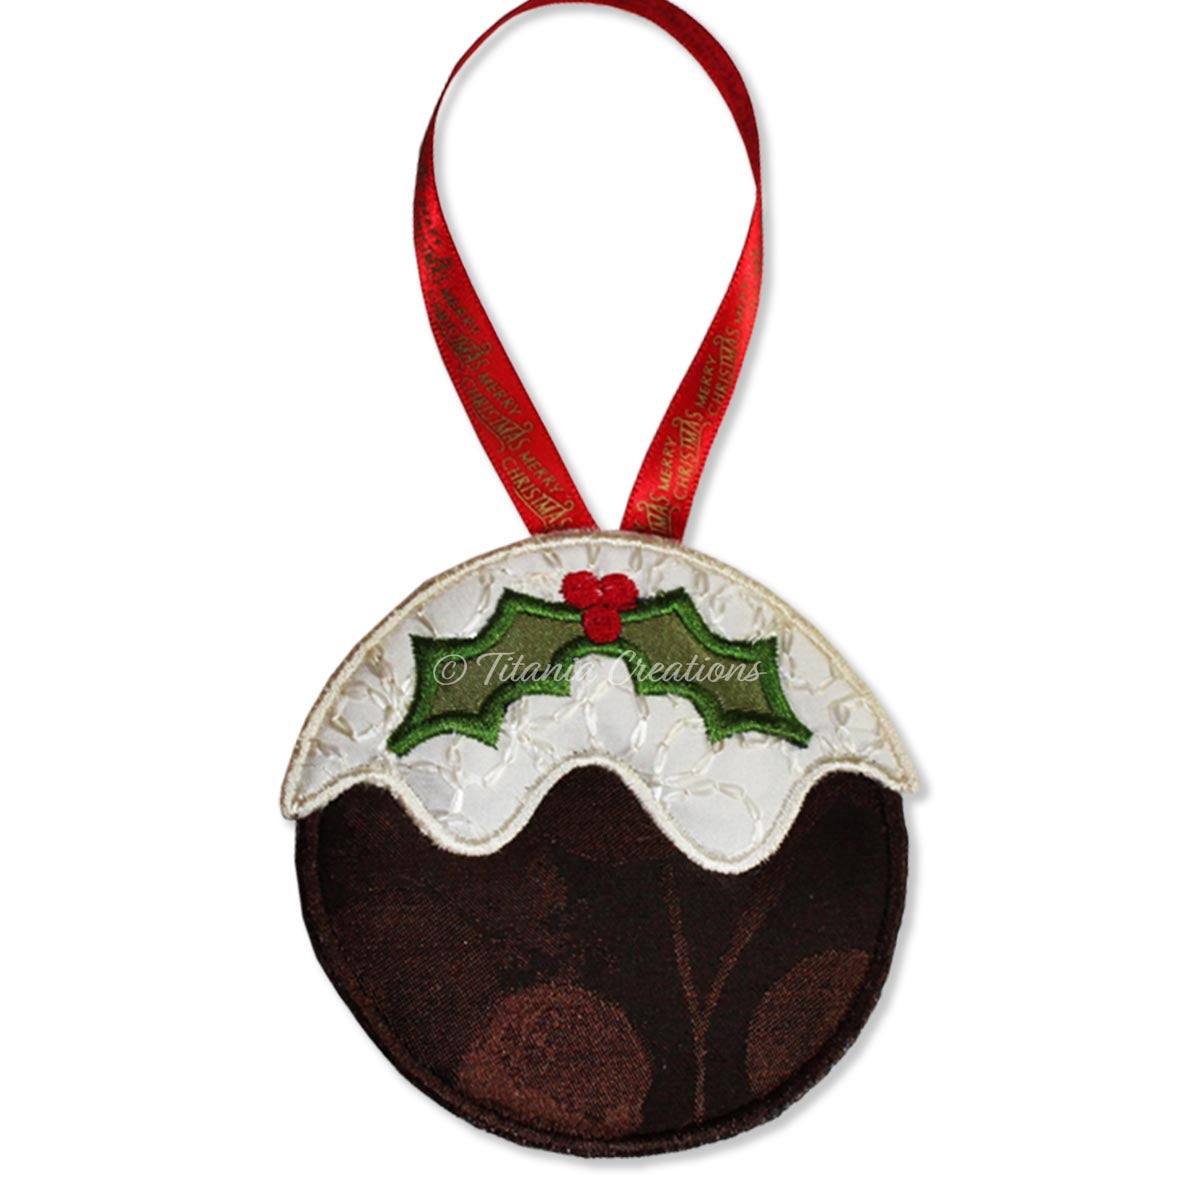 ITH Christmas Pudding Decoration with Satin Stitch Edge 4x4